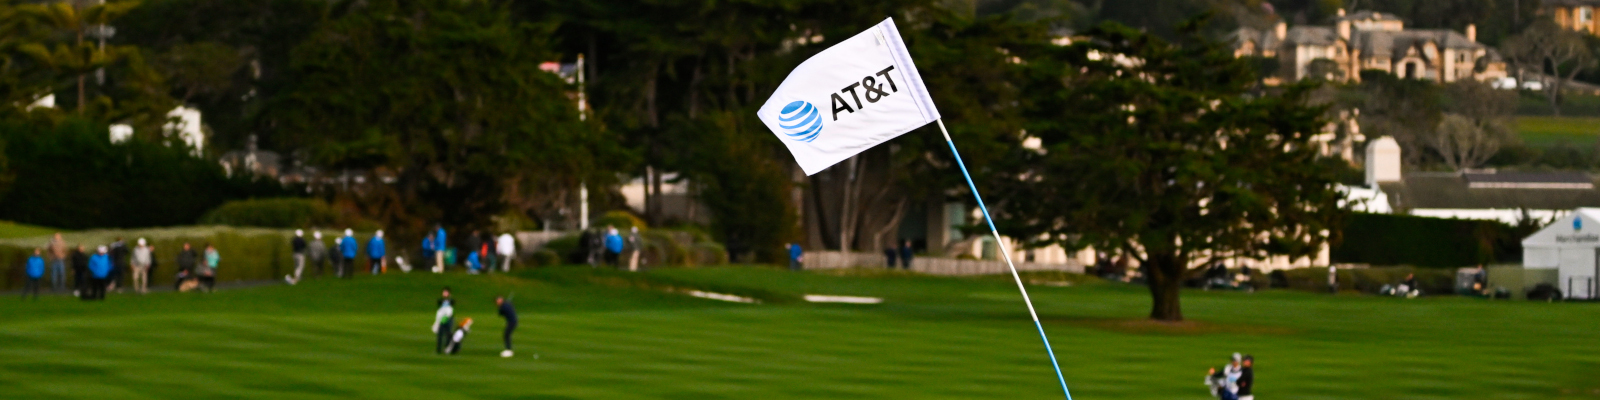 Verbogener Flaggenstock beim AT&T Pebble Beach Pro-Am (Photo by Tracy Wilcox/PGA TOUR via Getty Images)